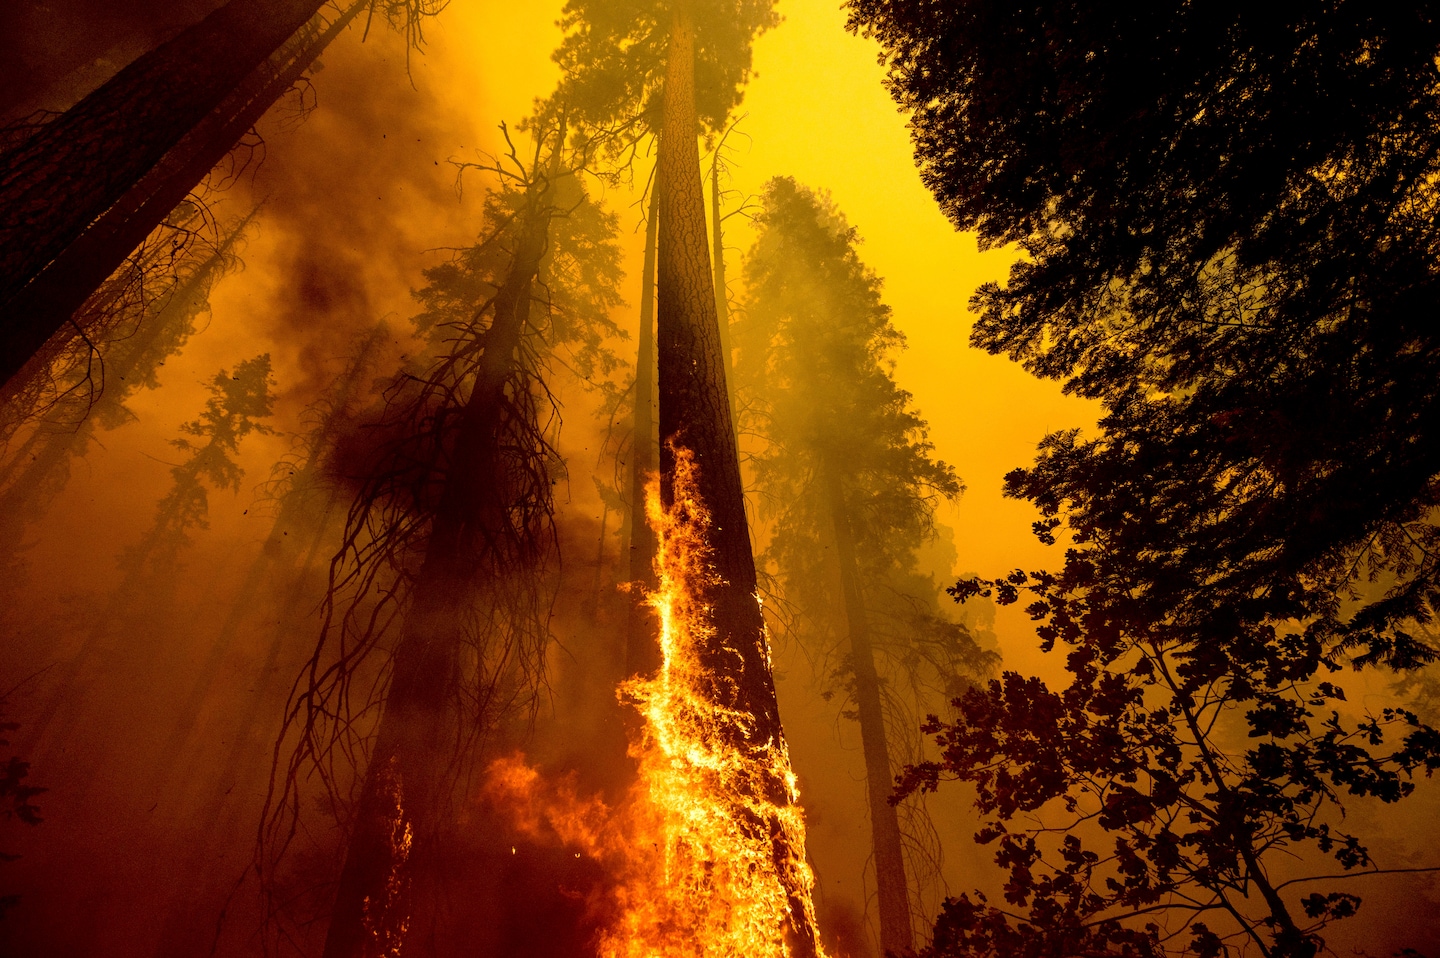 Hundreds of giant sequoias may have been killed in California fires, park officials say - The Washington Post